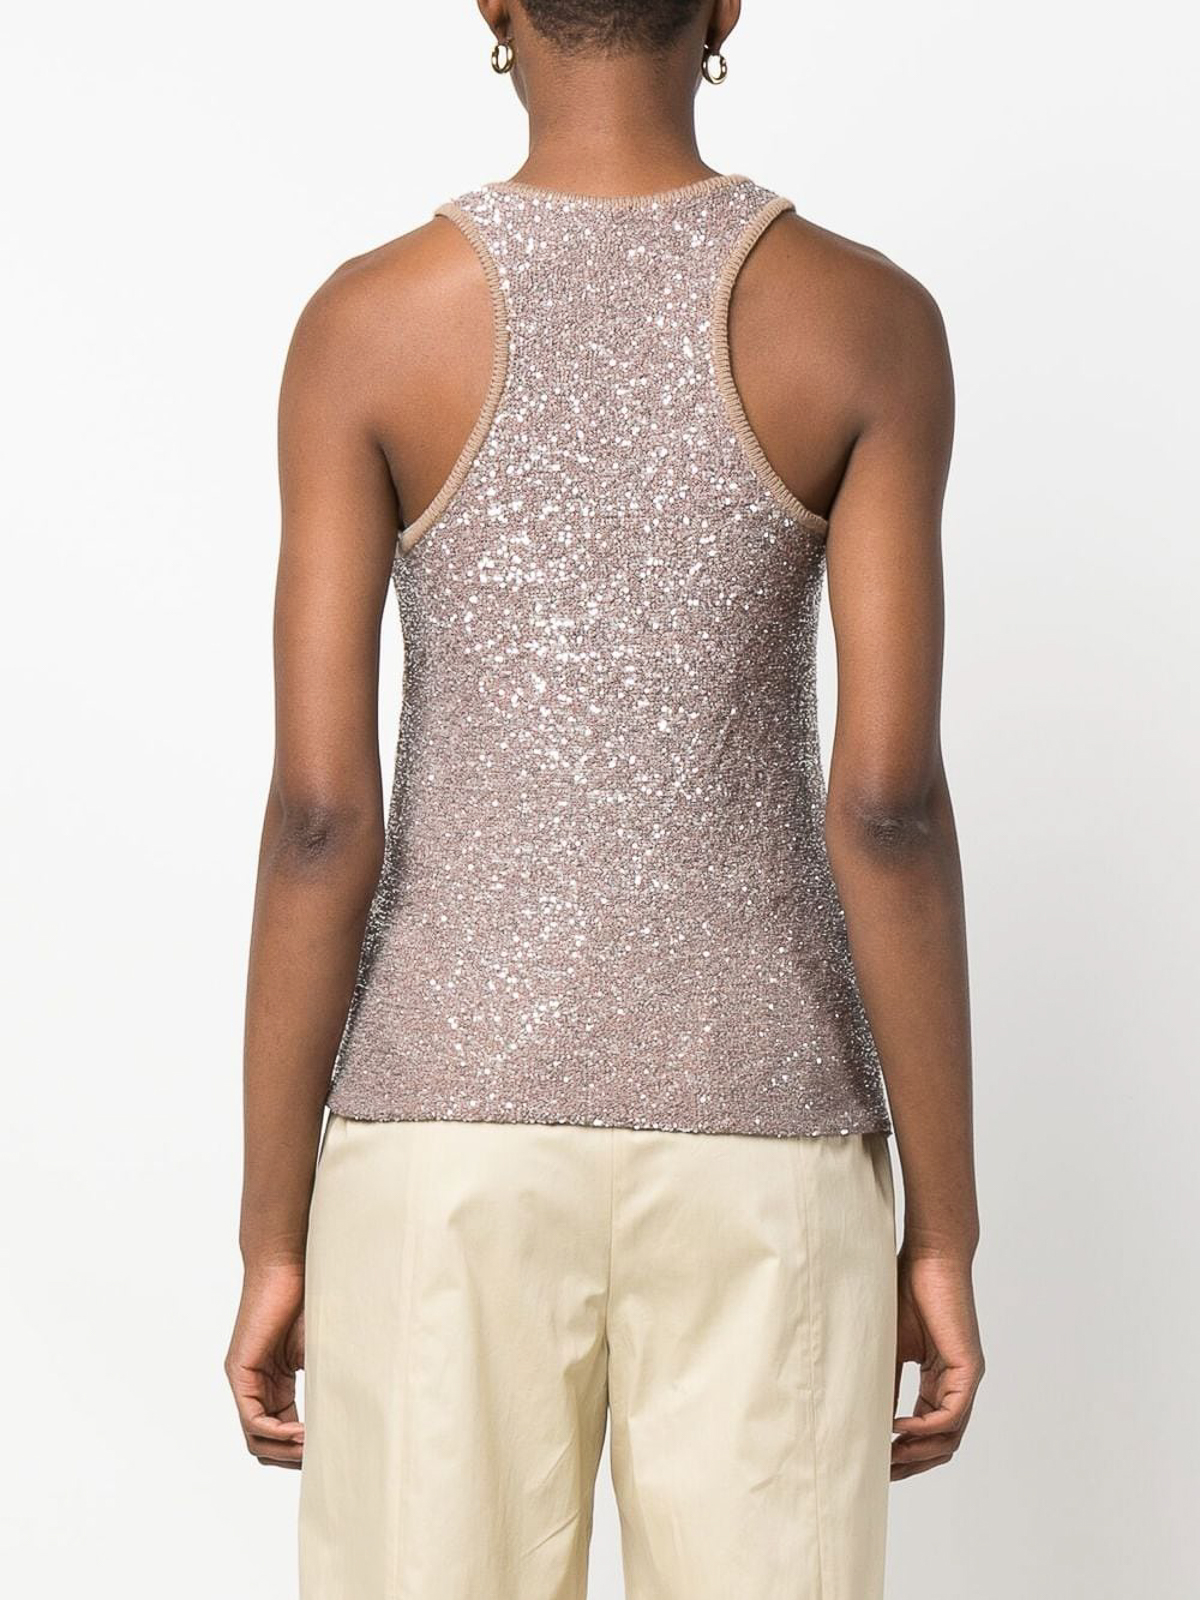 honing Uitrusting . Tops & Tank tops Fabiana Filippi - Sequined tank top - MADC01W025E011VR1